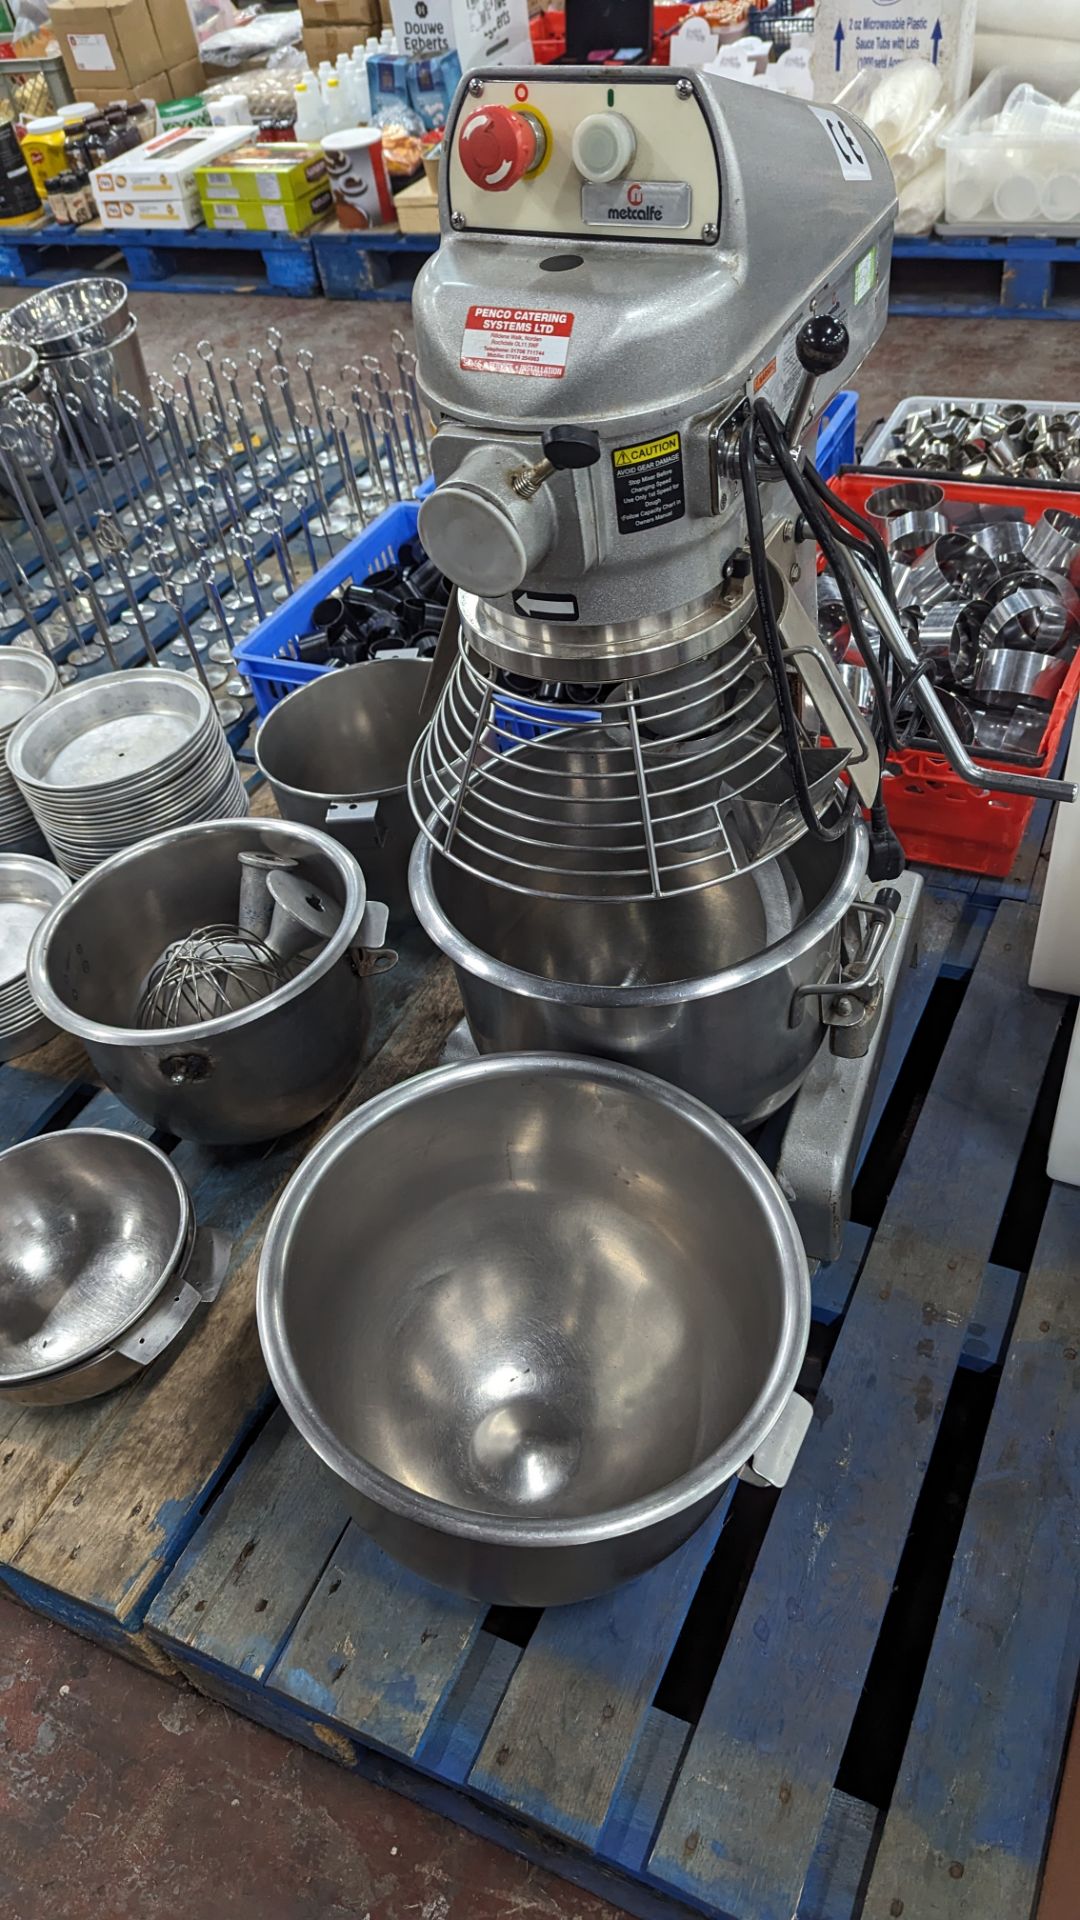 Metcalfe heavy duty commercial food mixer including quantity of bowls, blades, paddles & similar - Image 6 of 11